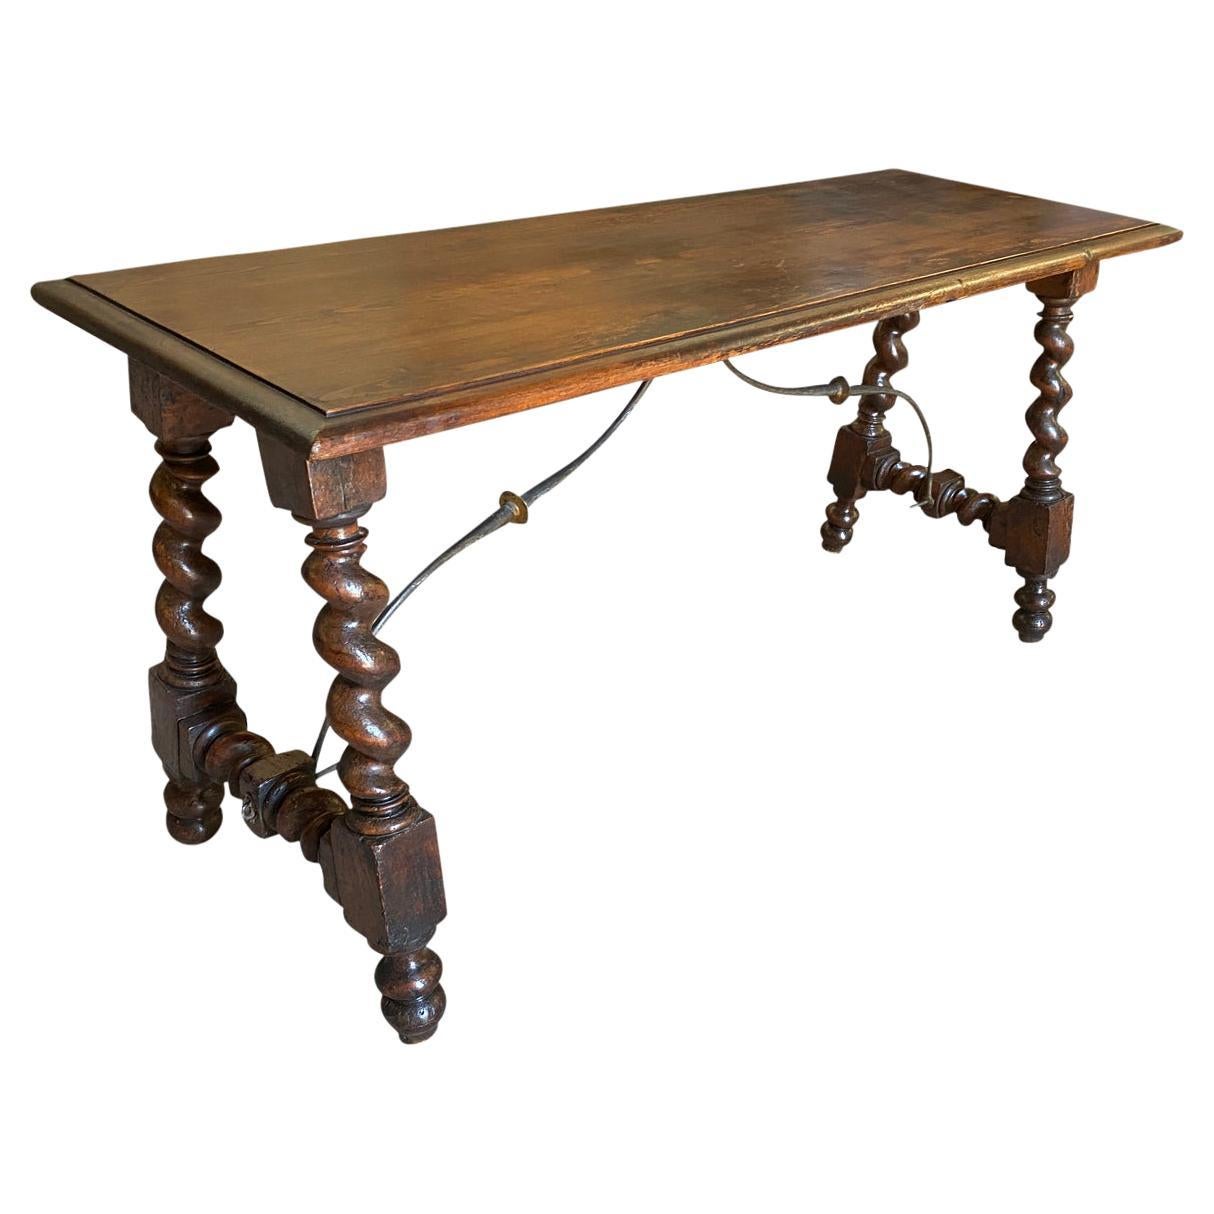 French Mid-19th Century Louis XIII Style Console Table